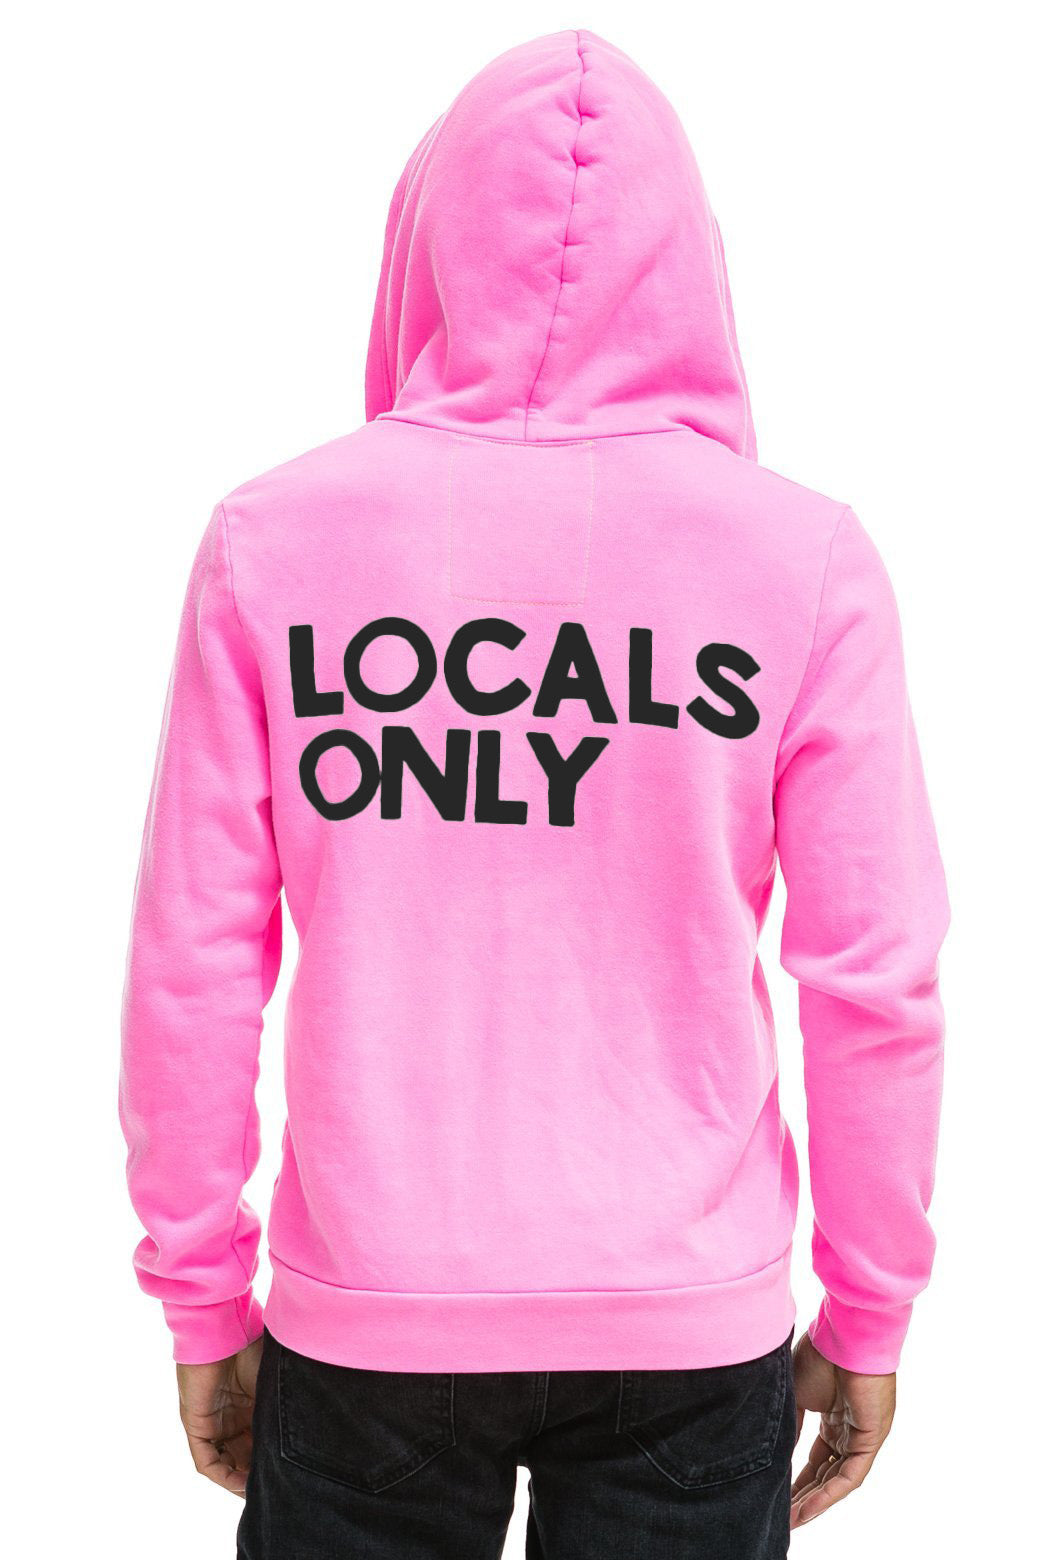 LOCALS ONLY HOODIE - NEON PINK Hoodie Aviator Nation 